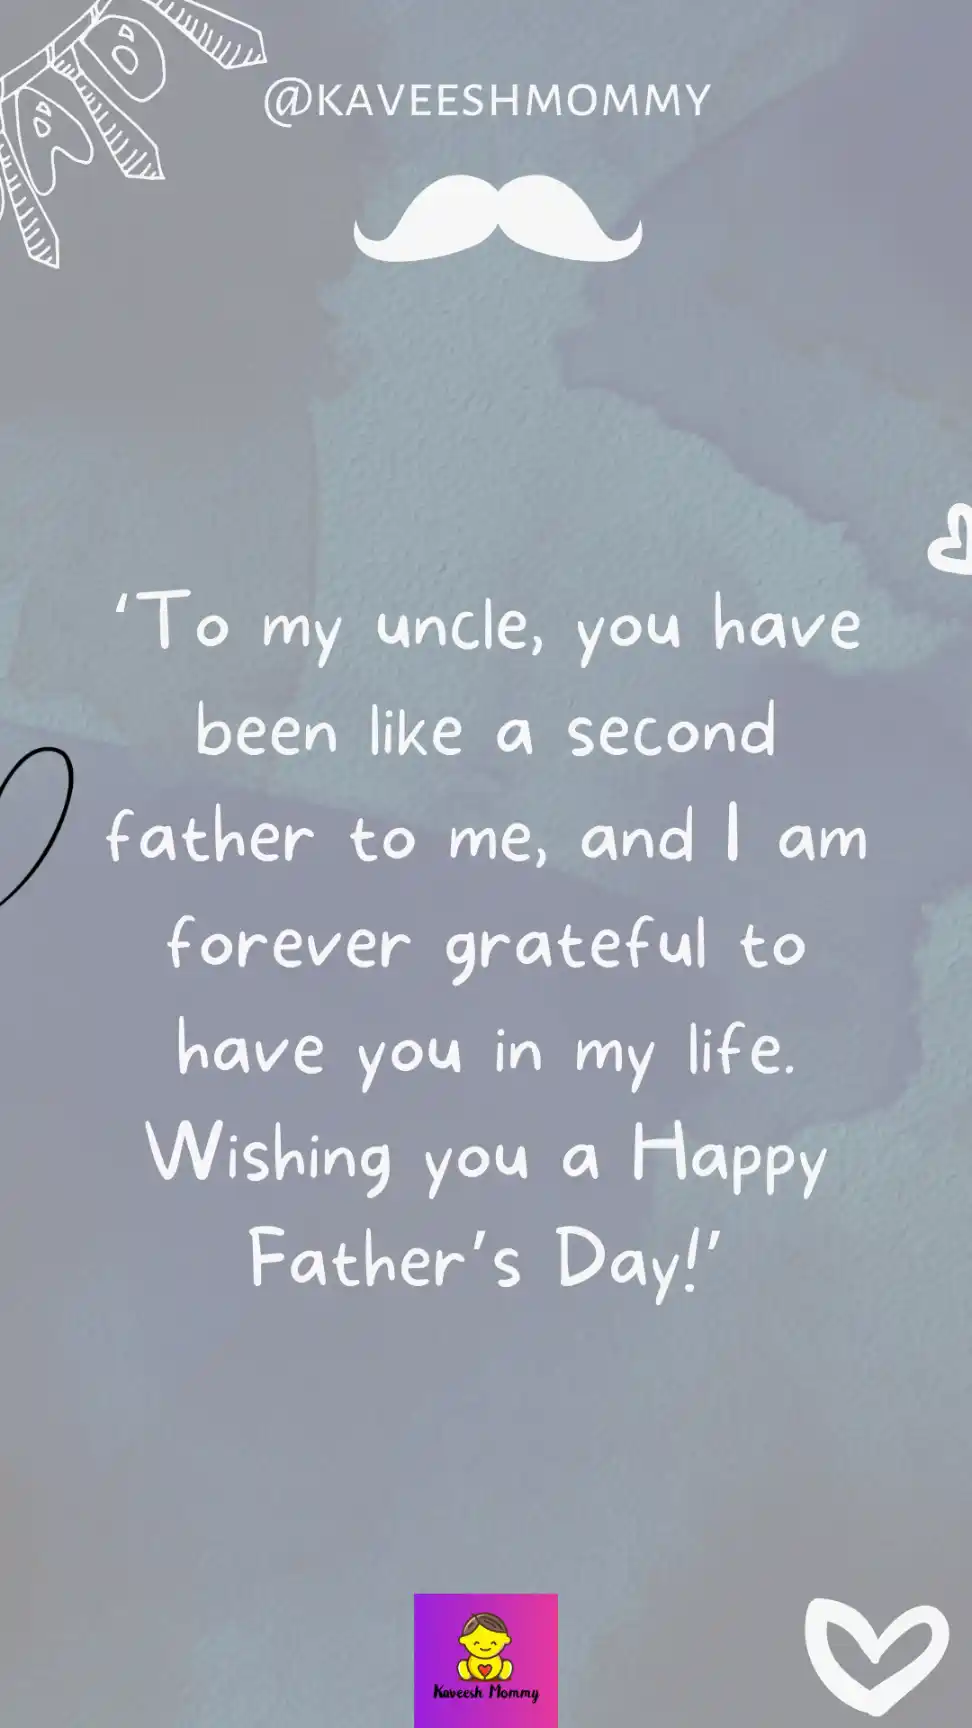 Happy Father's Day Wishes for Uncle 